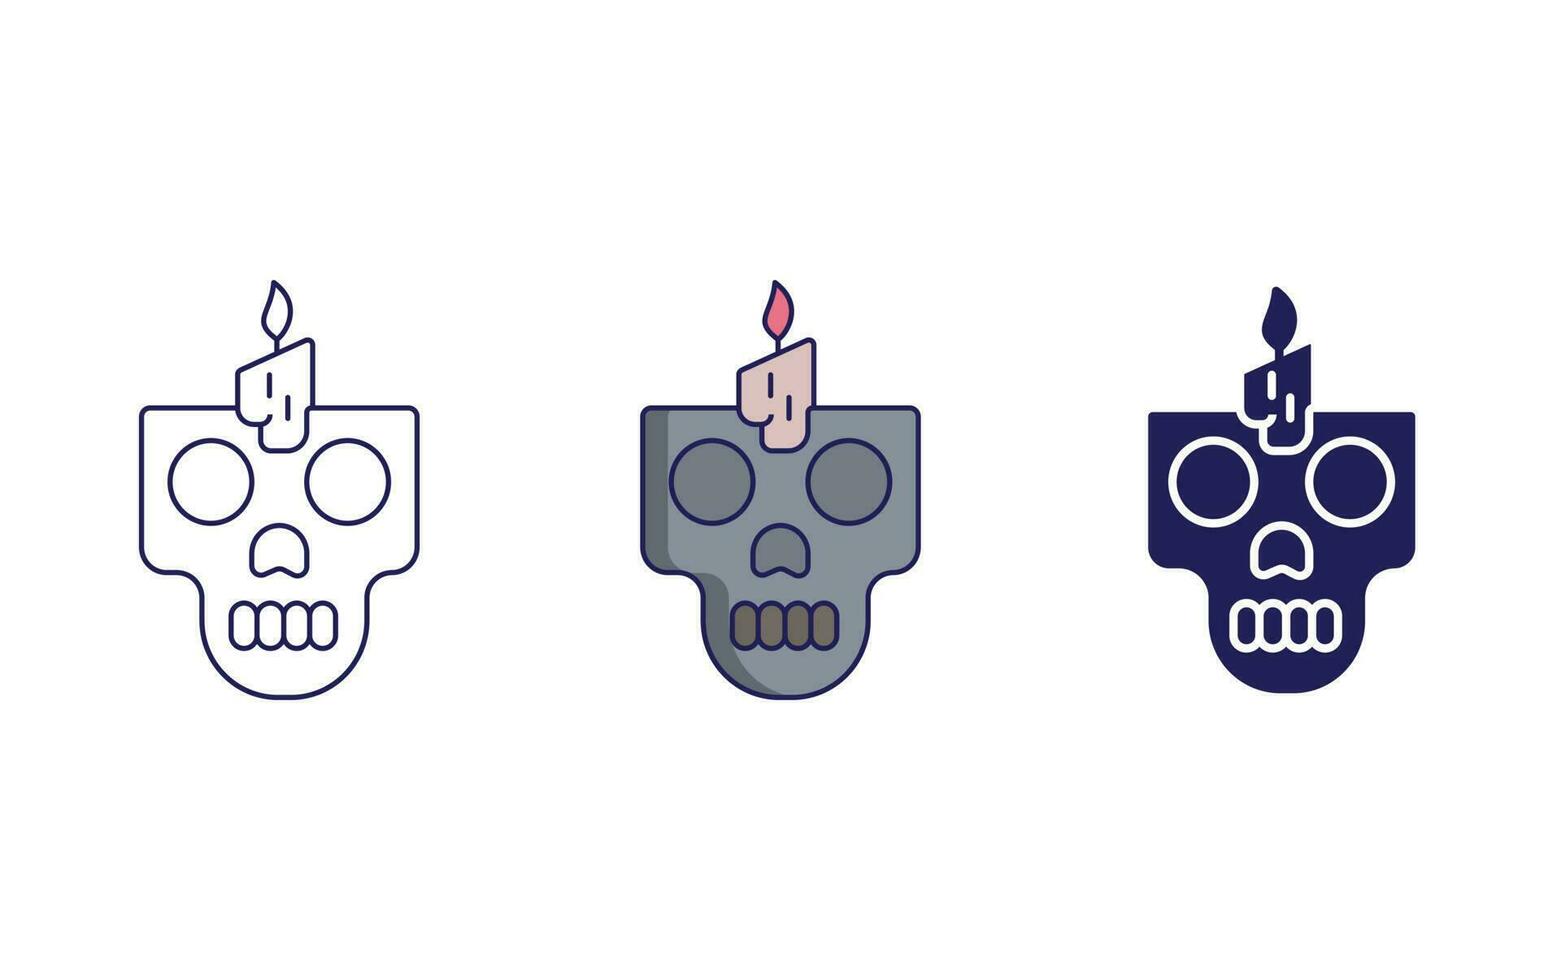 Candle vector icon